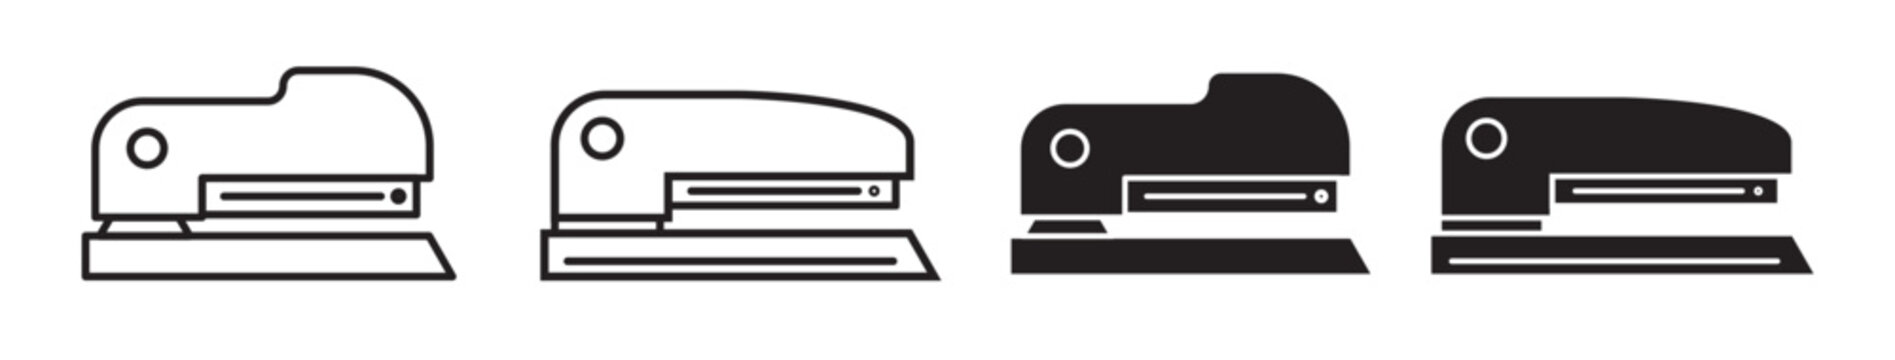 Stapler icon set in black filled and outlined style. Office paper staple stapler line icons.